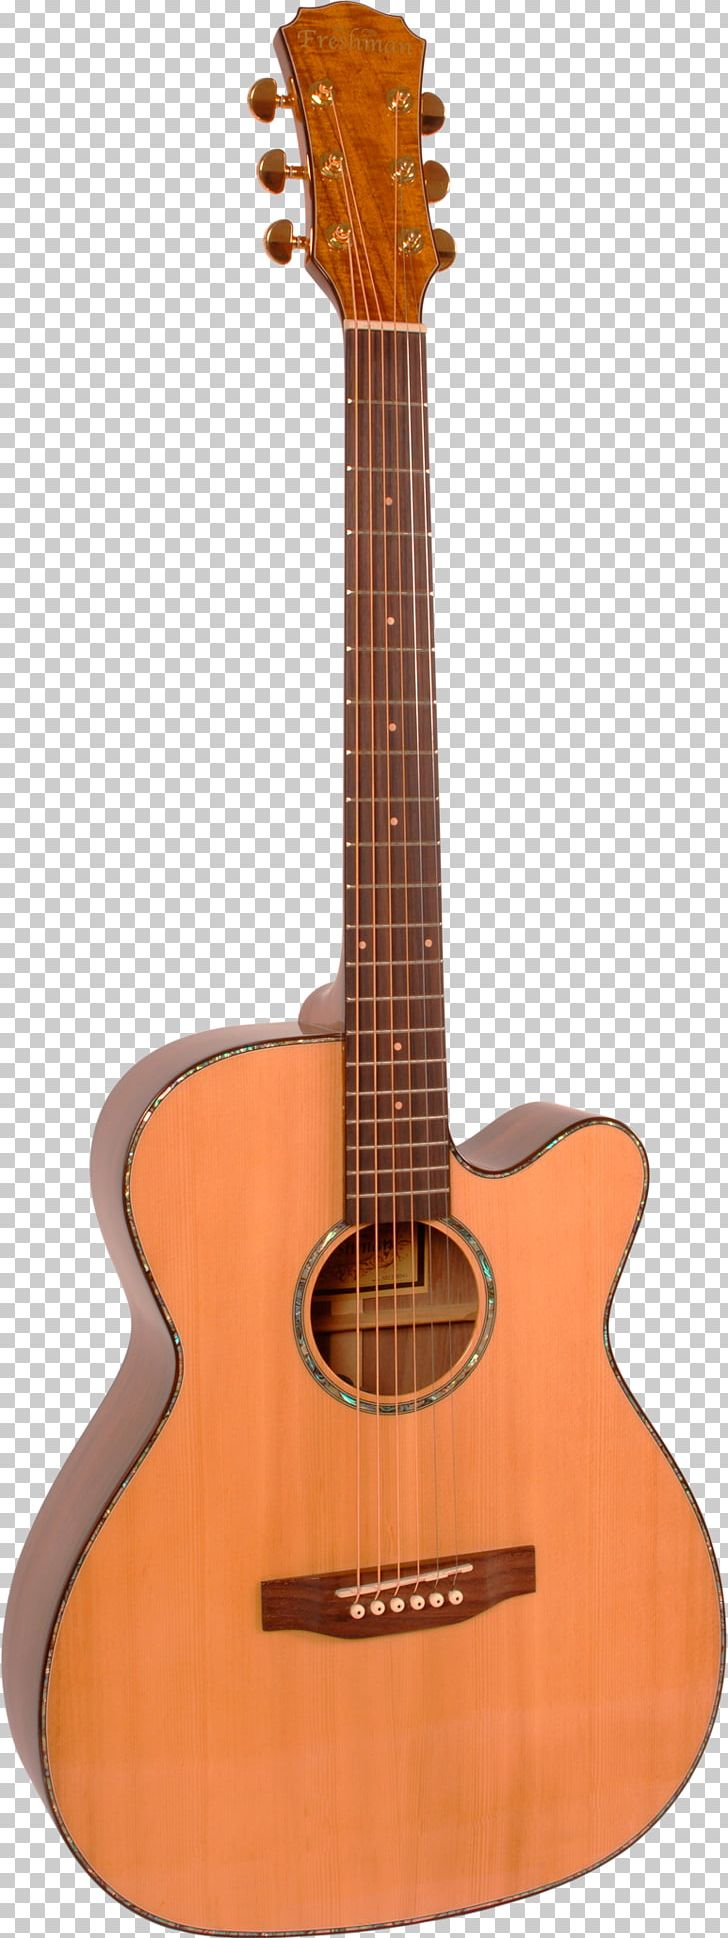 Classical Guitar Steel-string Acoustic Guitar String Instruments PNG, Clipart, Acoustic Electric Guitar, Bridge, Classical Guitar, Cuatro, Guitar Accessory Free PNG Download